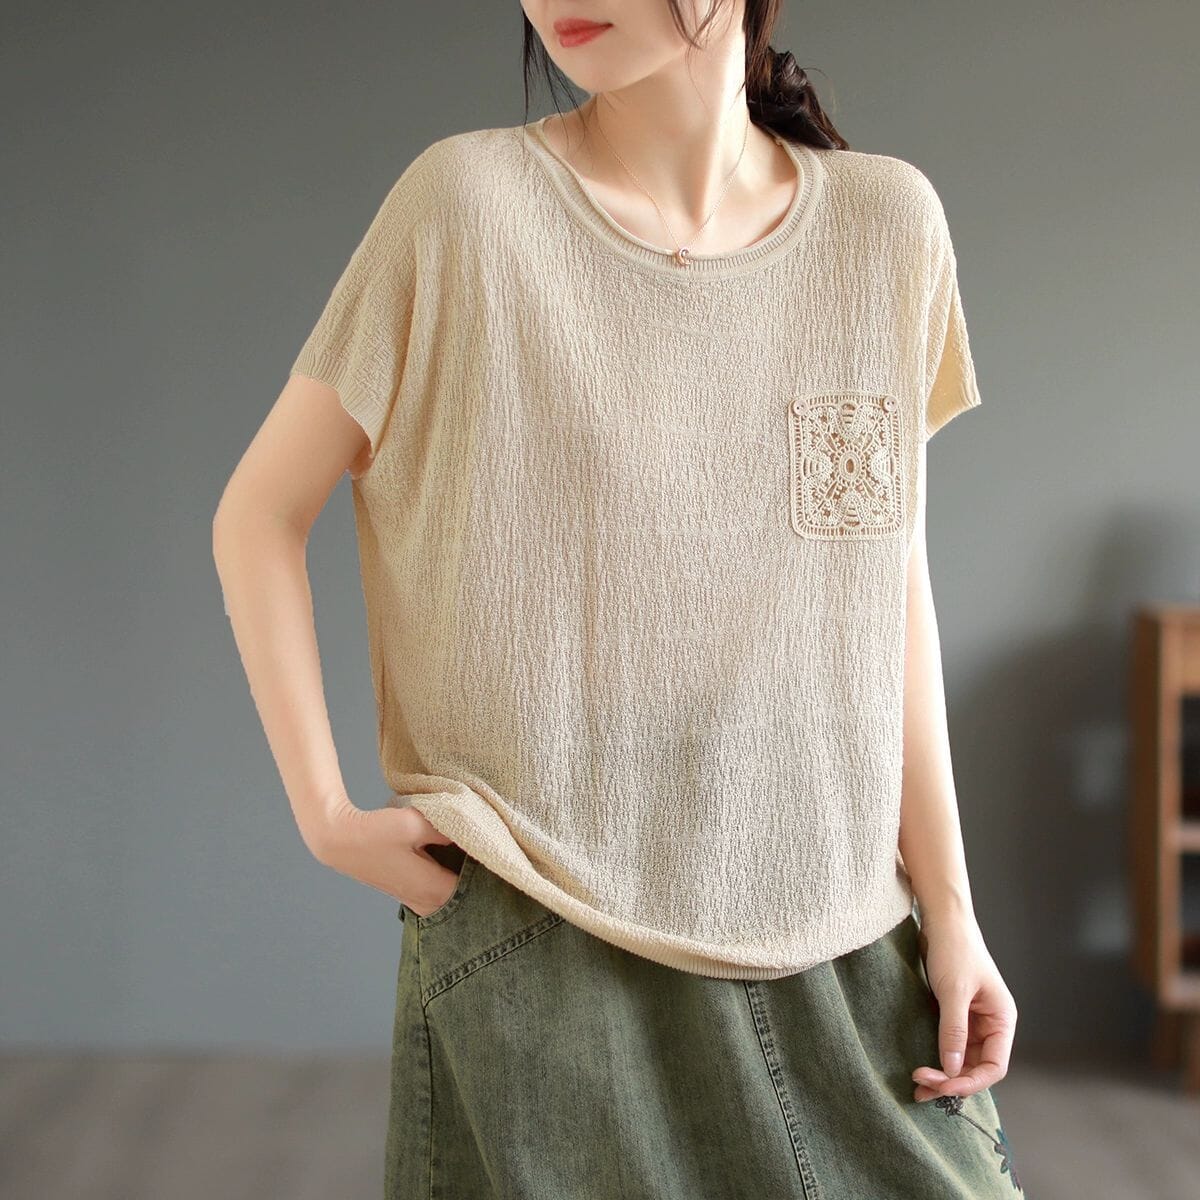 Women Summer Stylish Casual Cotton Kintted T-Shirt